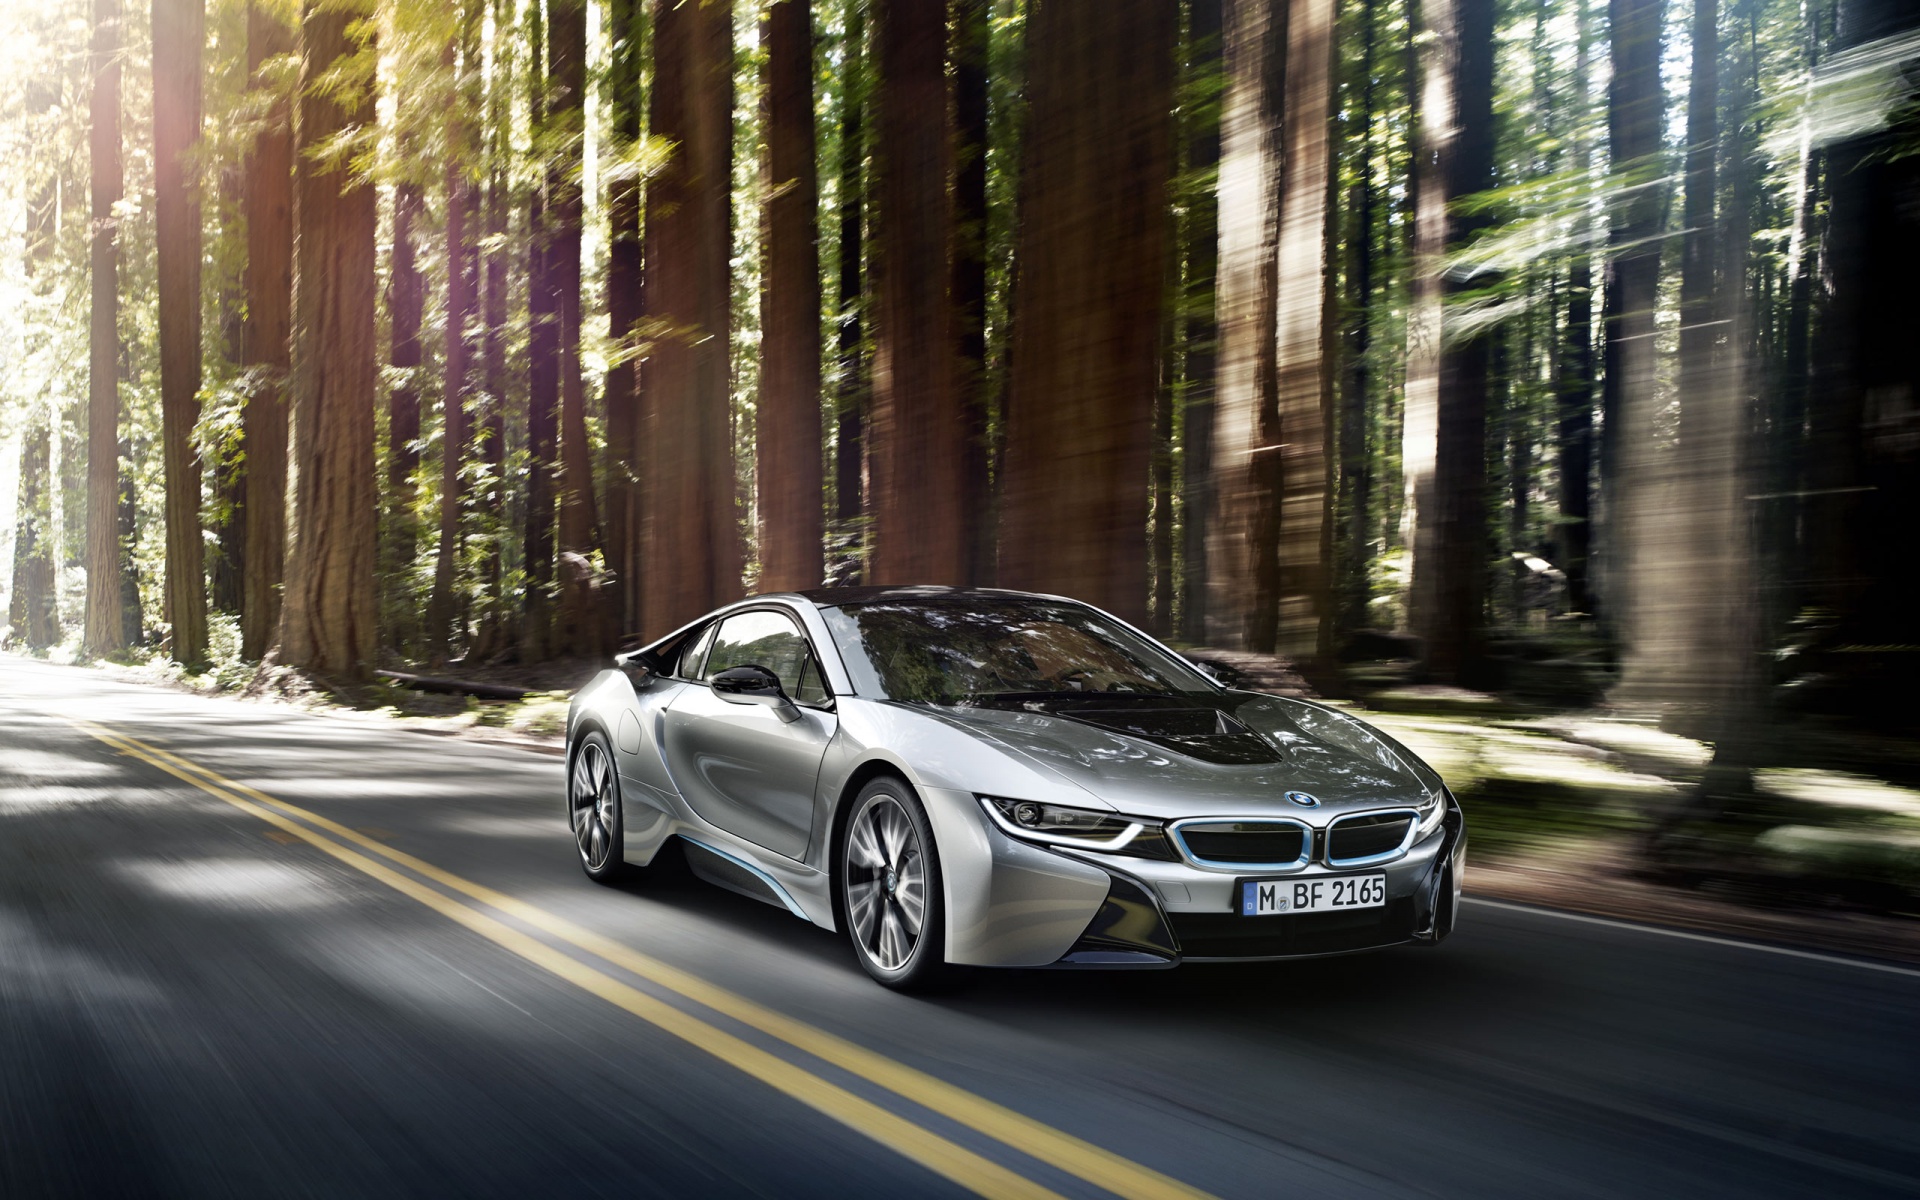 Awesome BMW i8 Wallpaper 3594